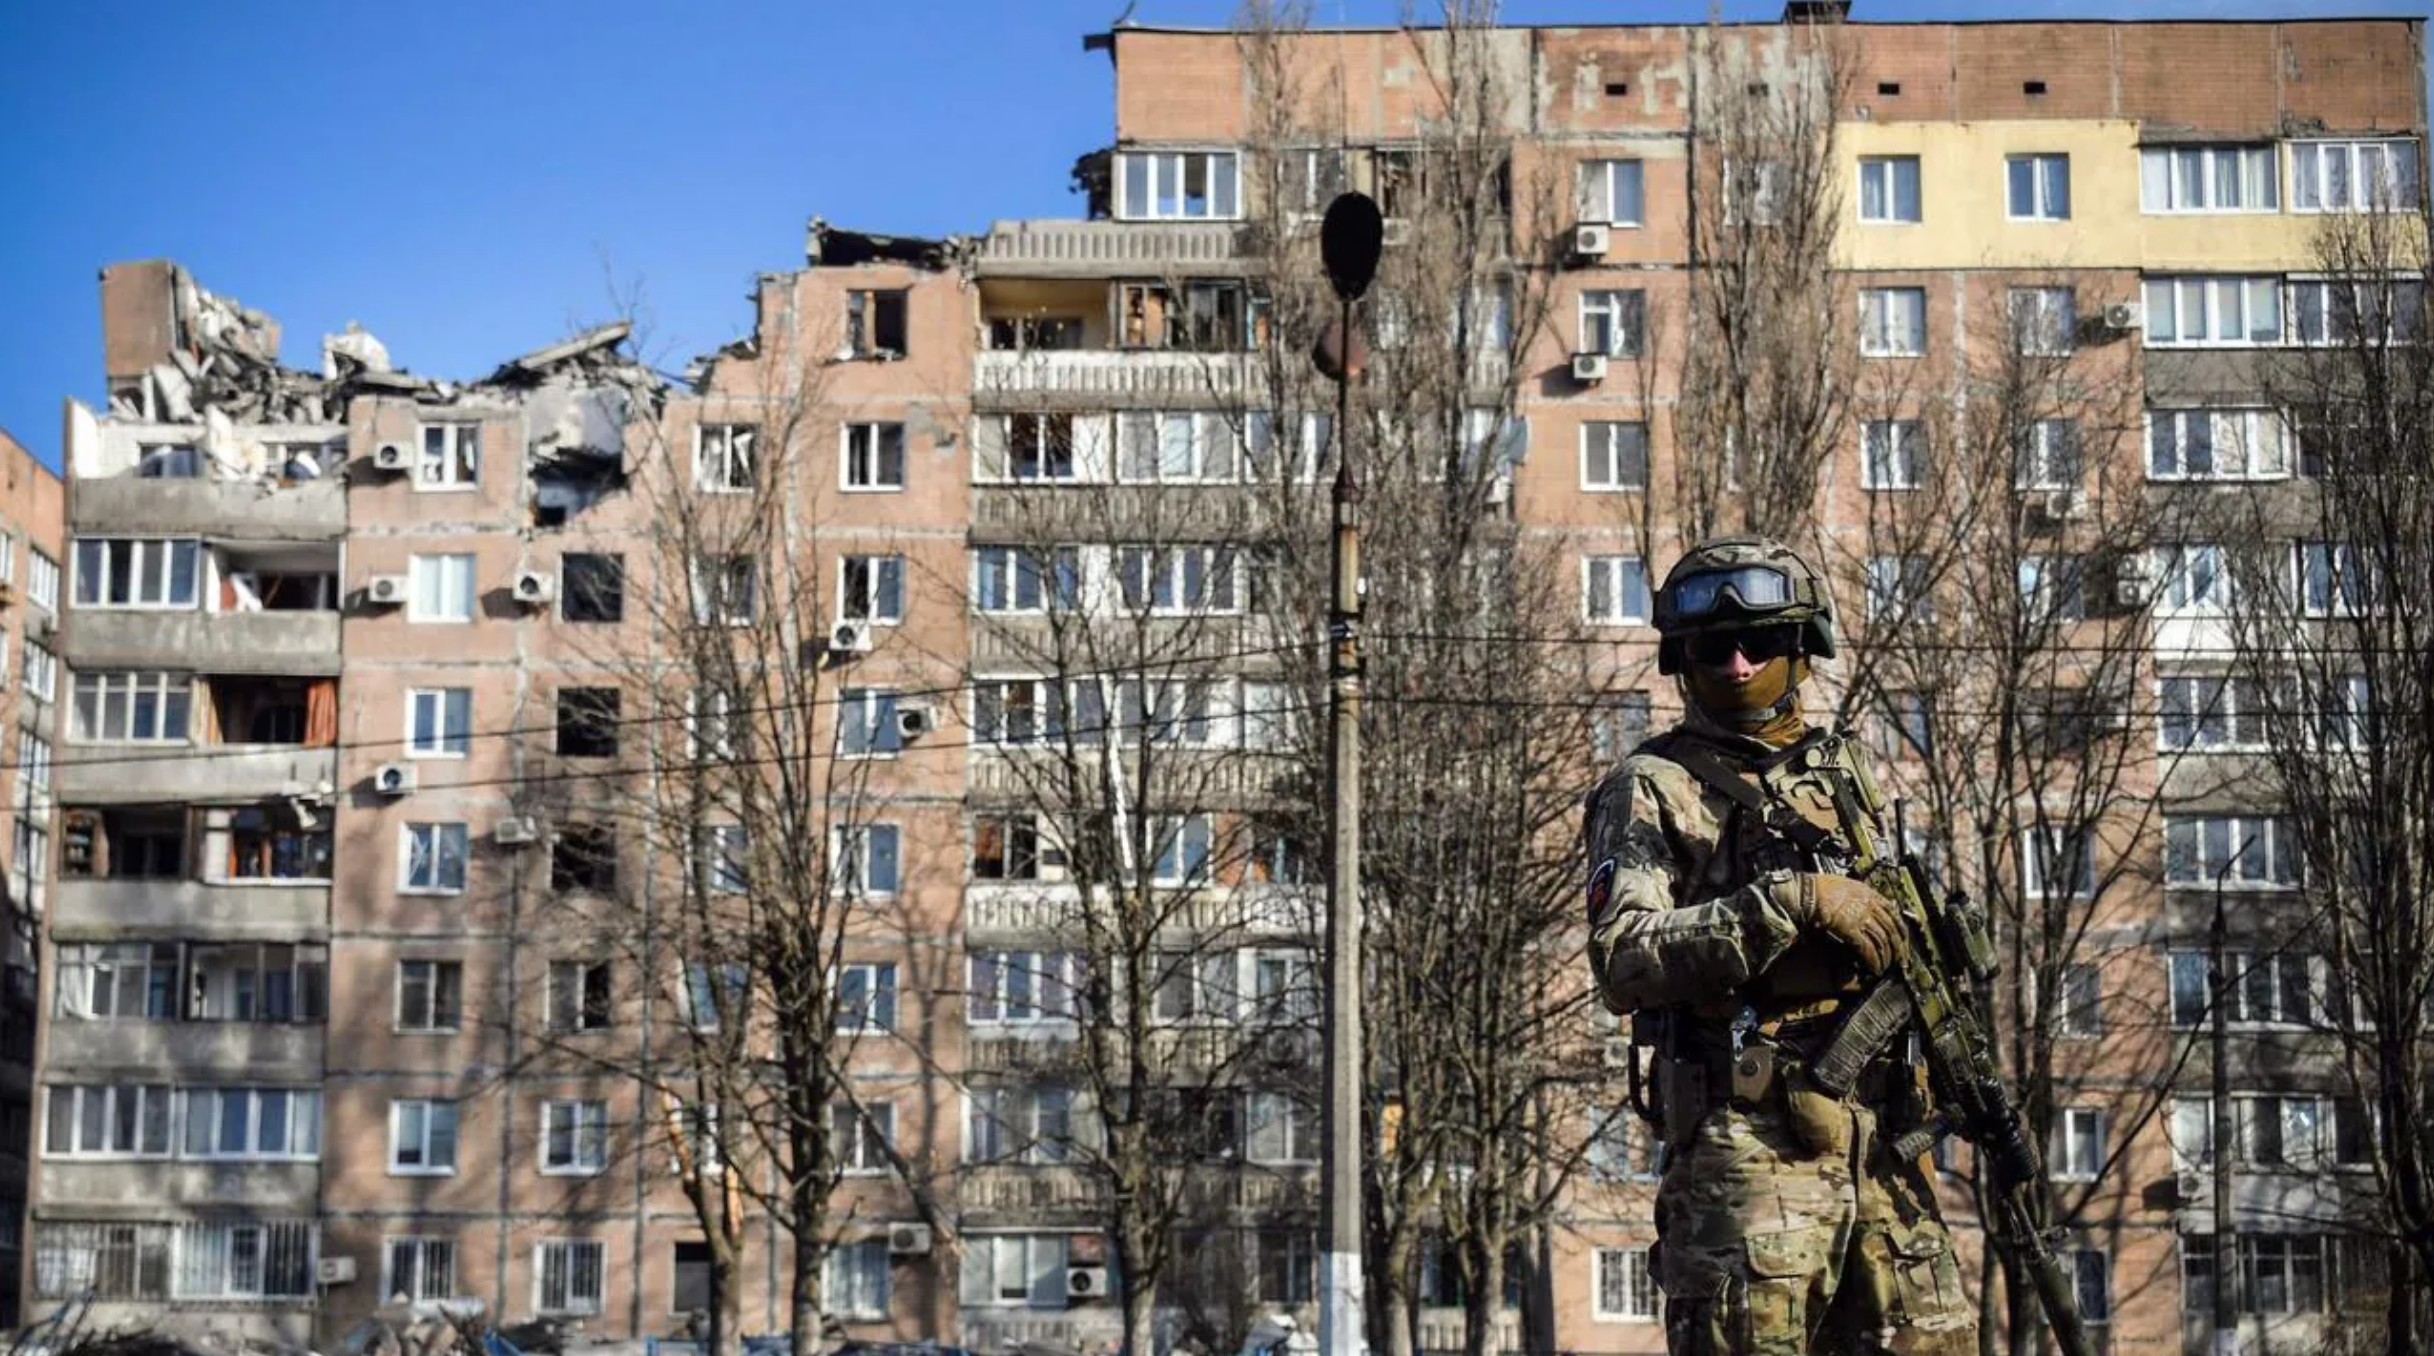 A Russian soldier outside a damaged apartment building in Donetsk